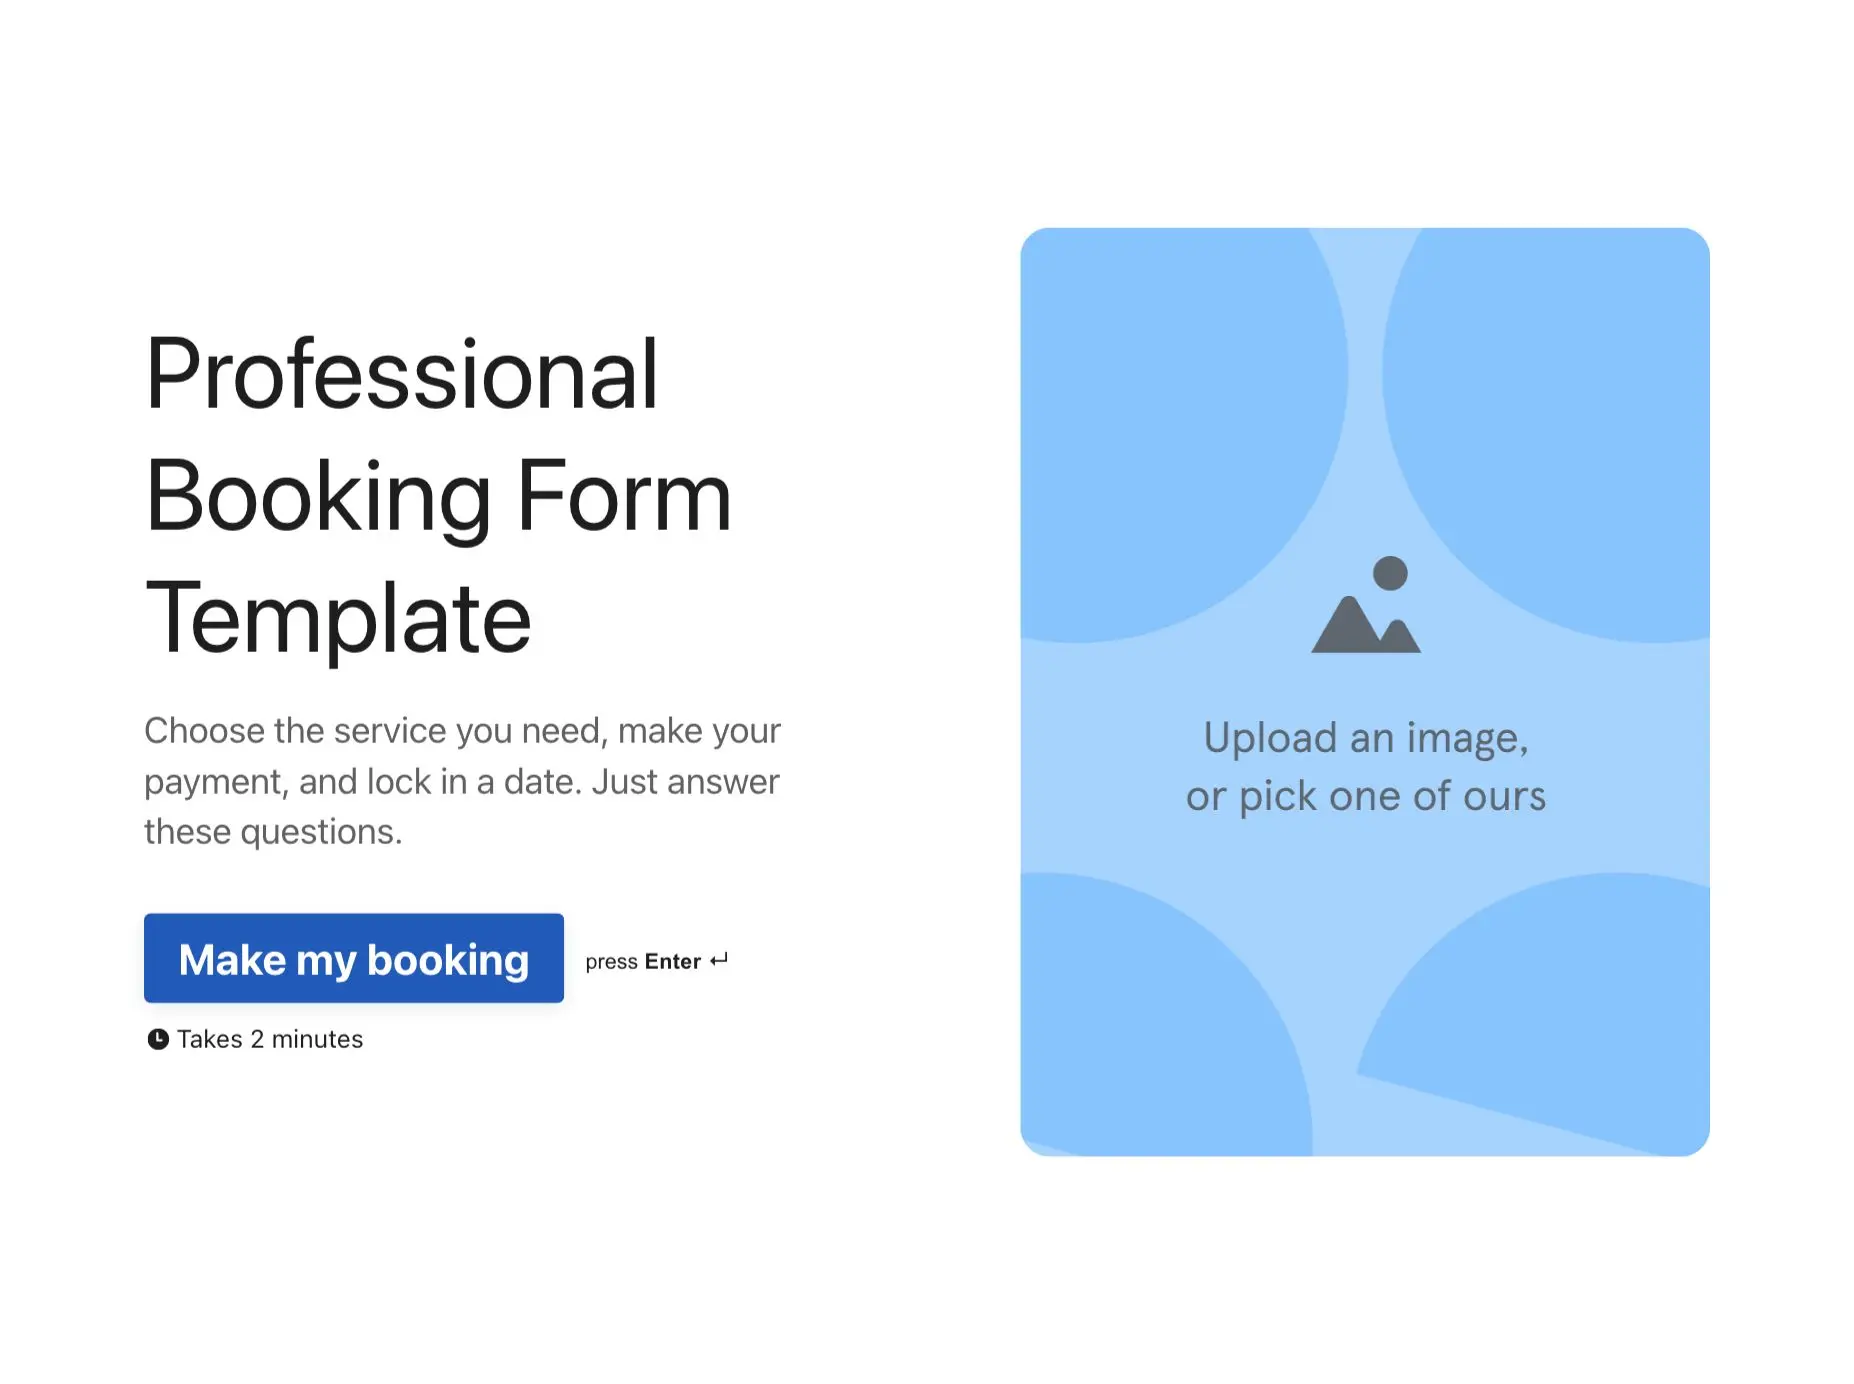 Professional Booking Form Template Hero